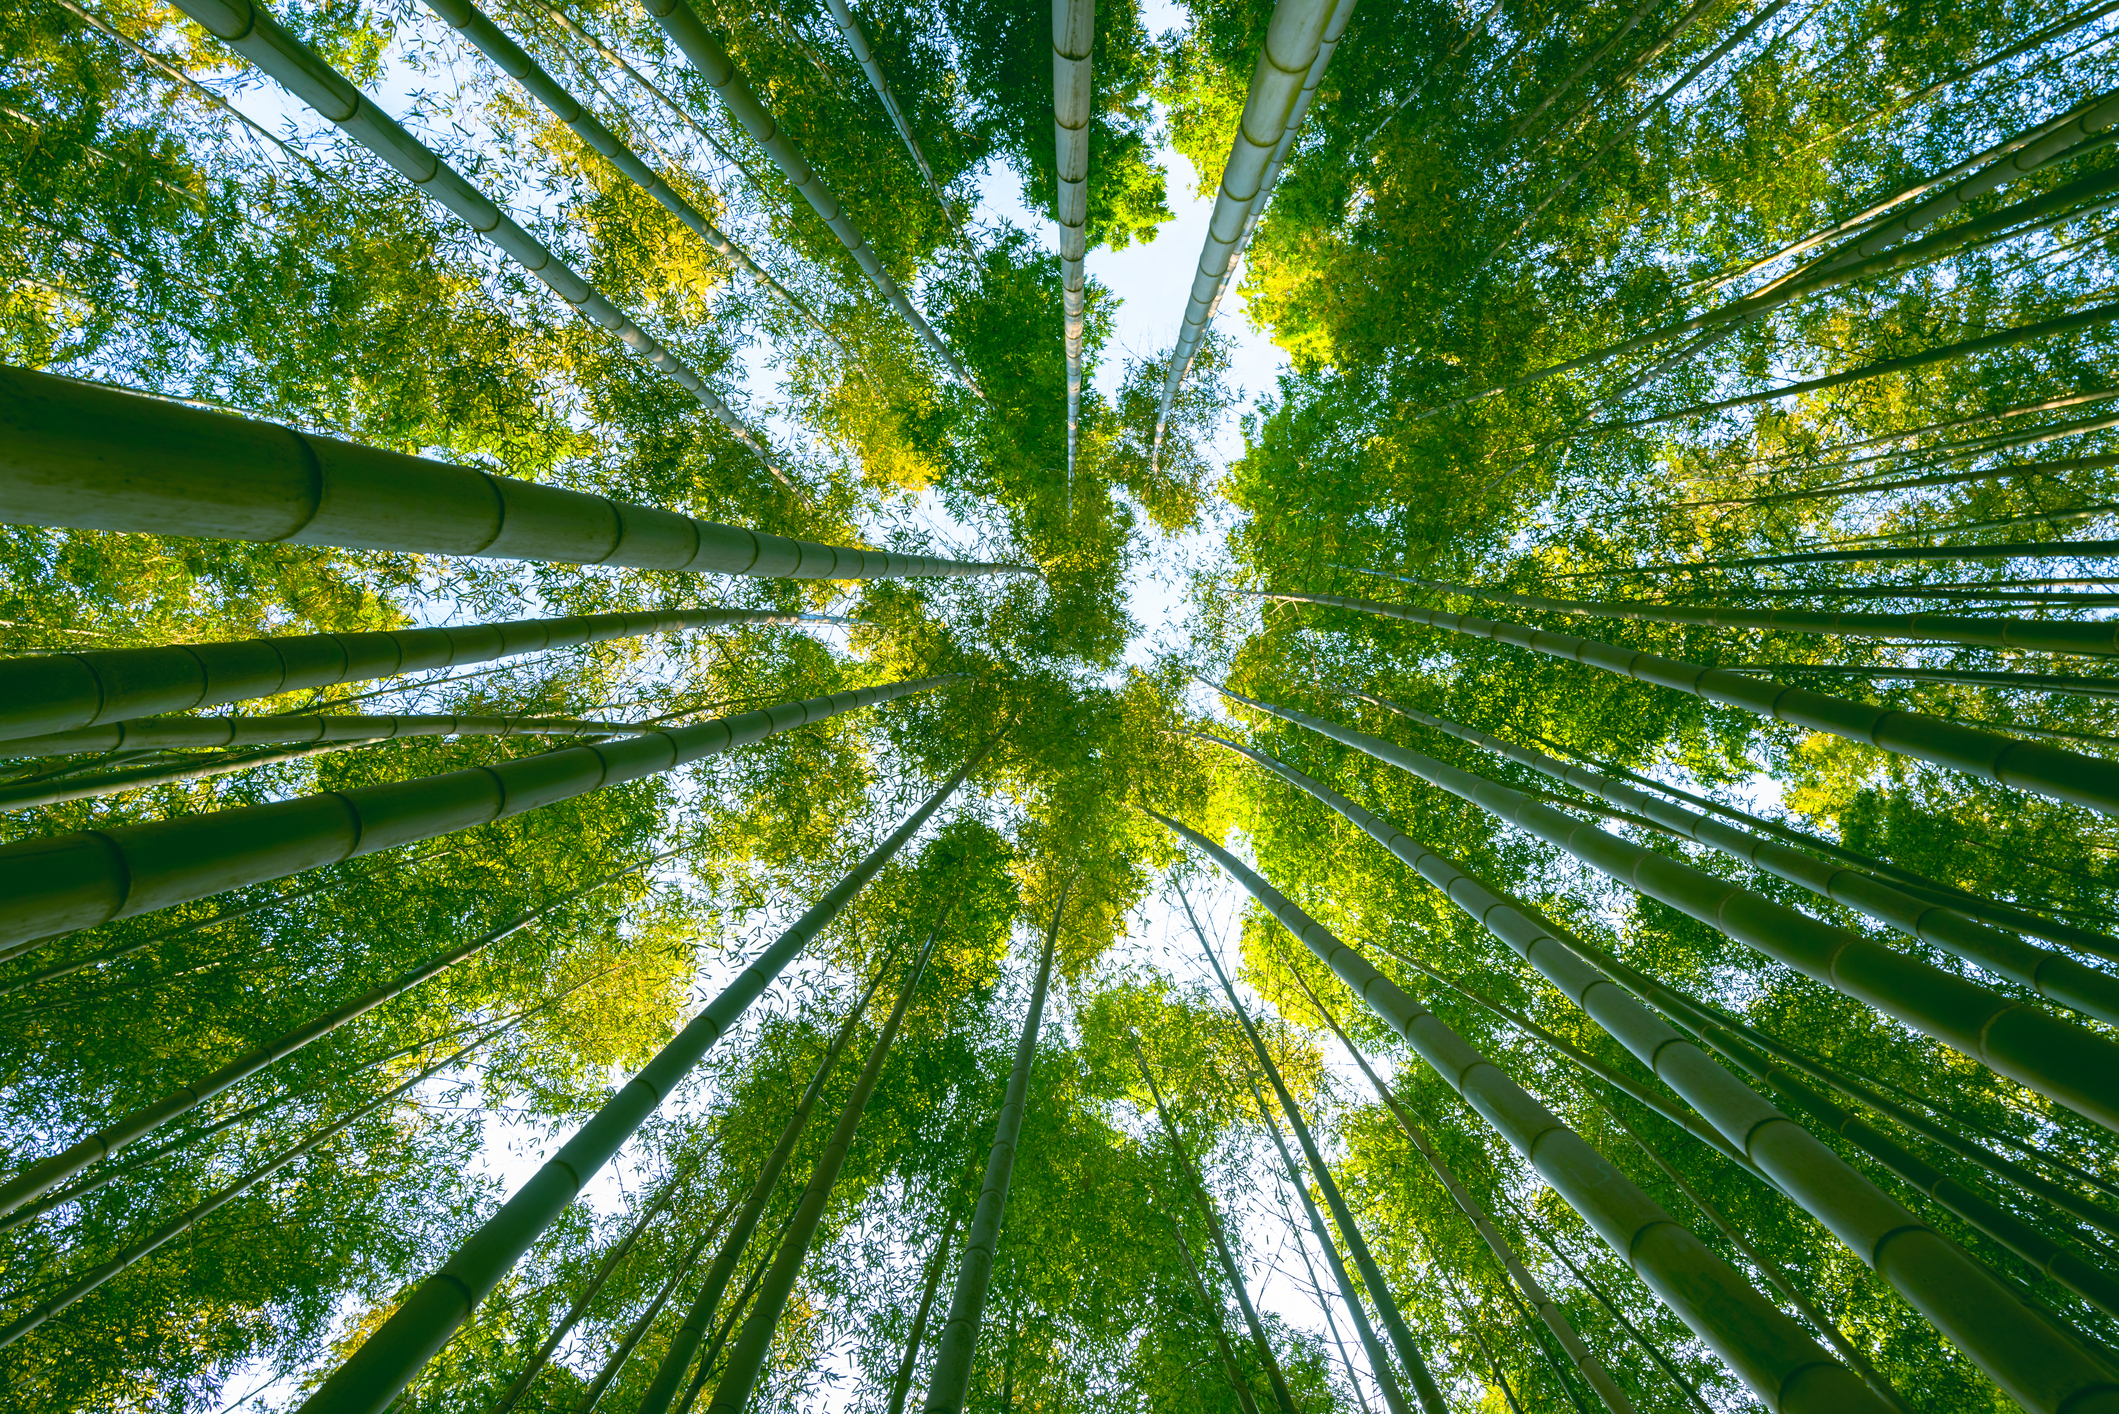 Looking up at the canopy of a lush green bamboo forest